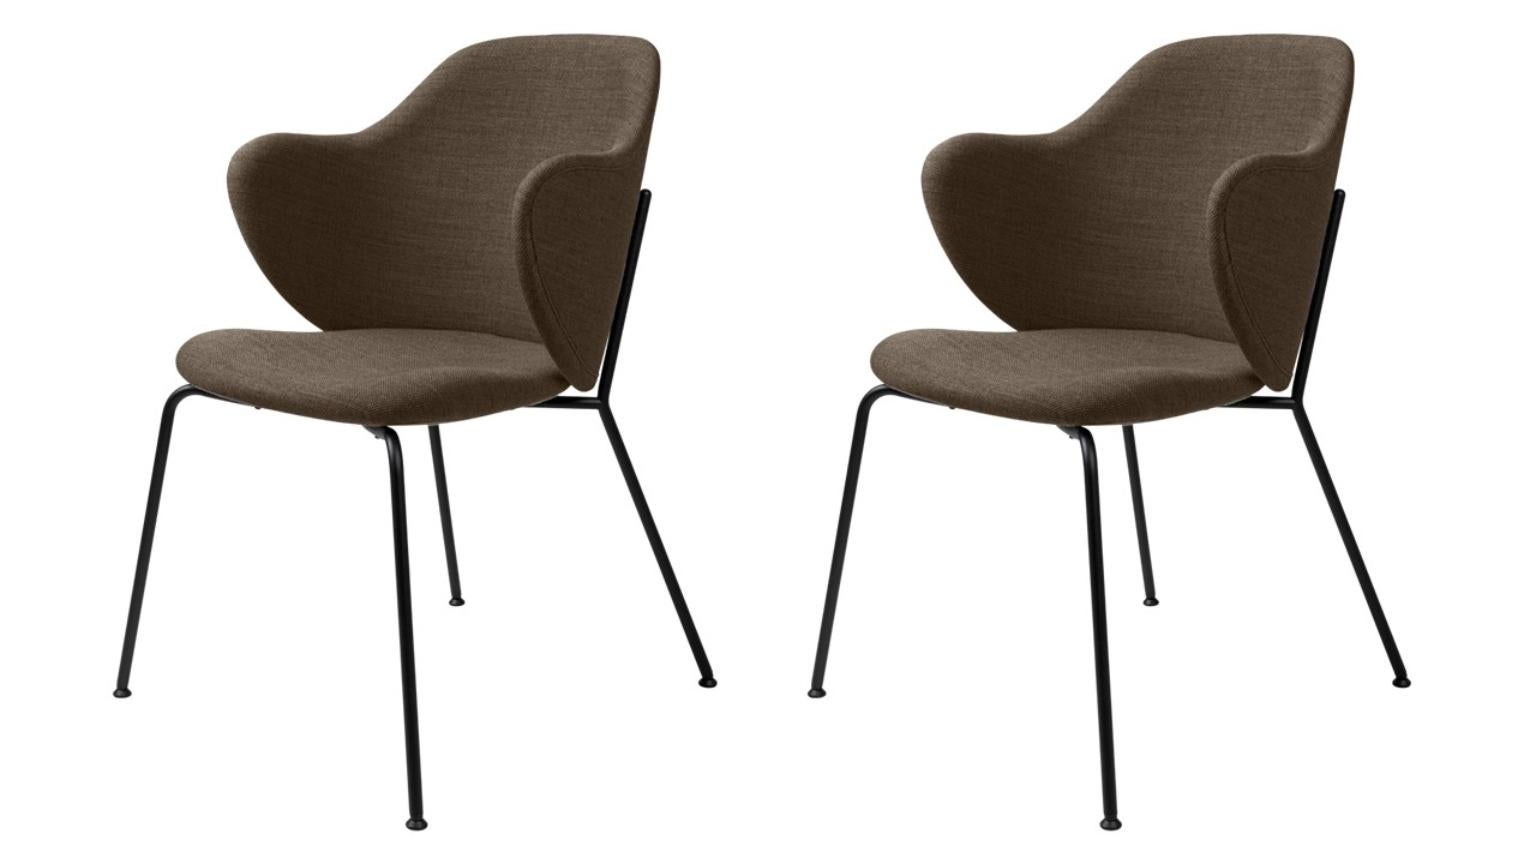 Set of 2 brown fiord lassen chairs by Lassen
Dimensions: W 58 x D 60 x H 88 cm 
Materials: textile

The Lassen Chair by Flemming Lassen, Magnus Sangild and Marianne Viktor was launched in 2018 as an ode to Flemming Lassen’s uncompromising